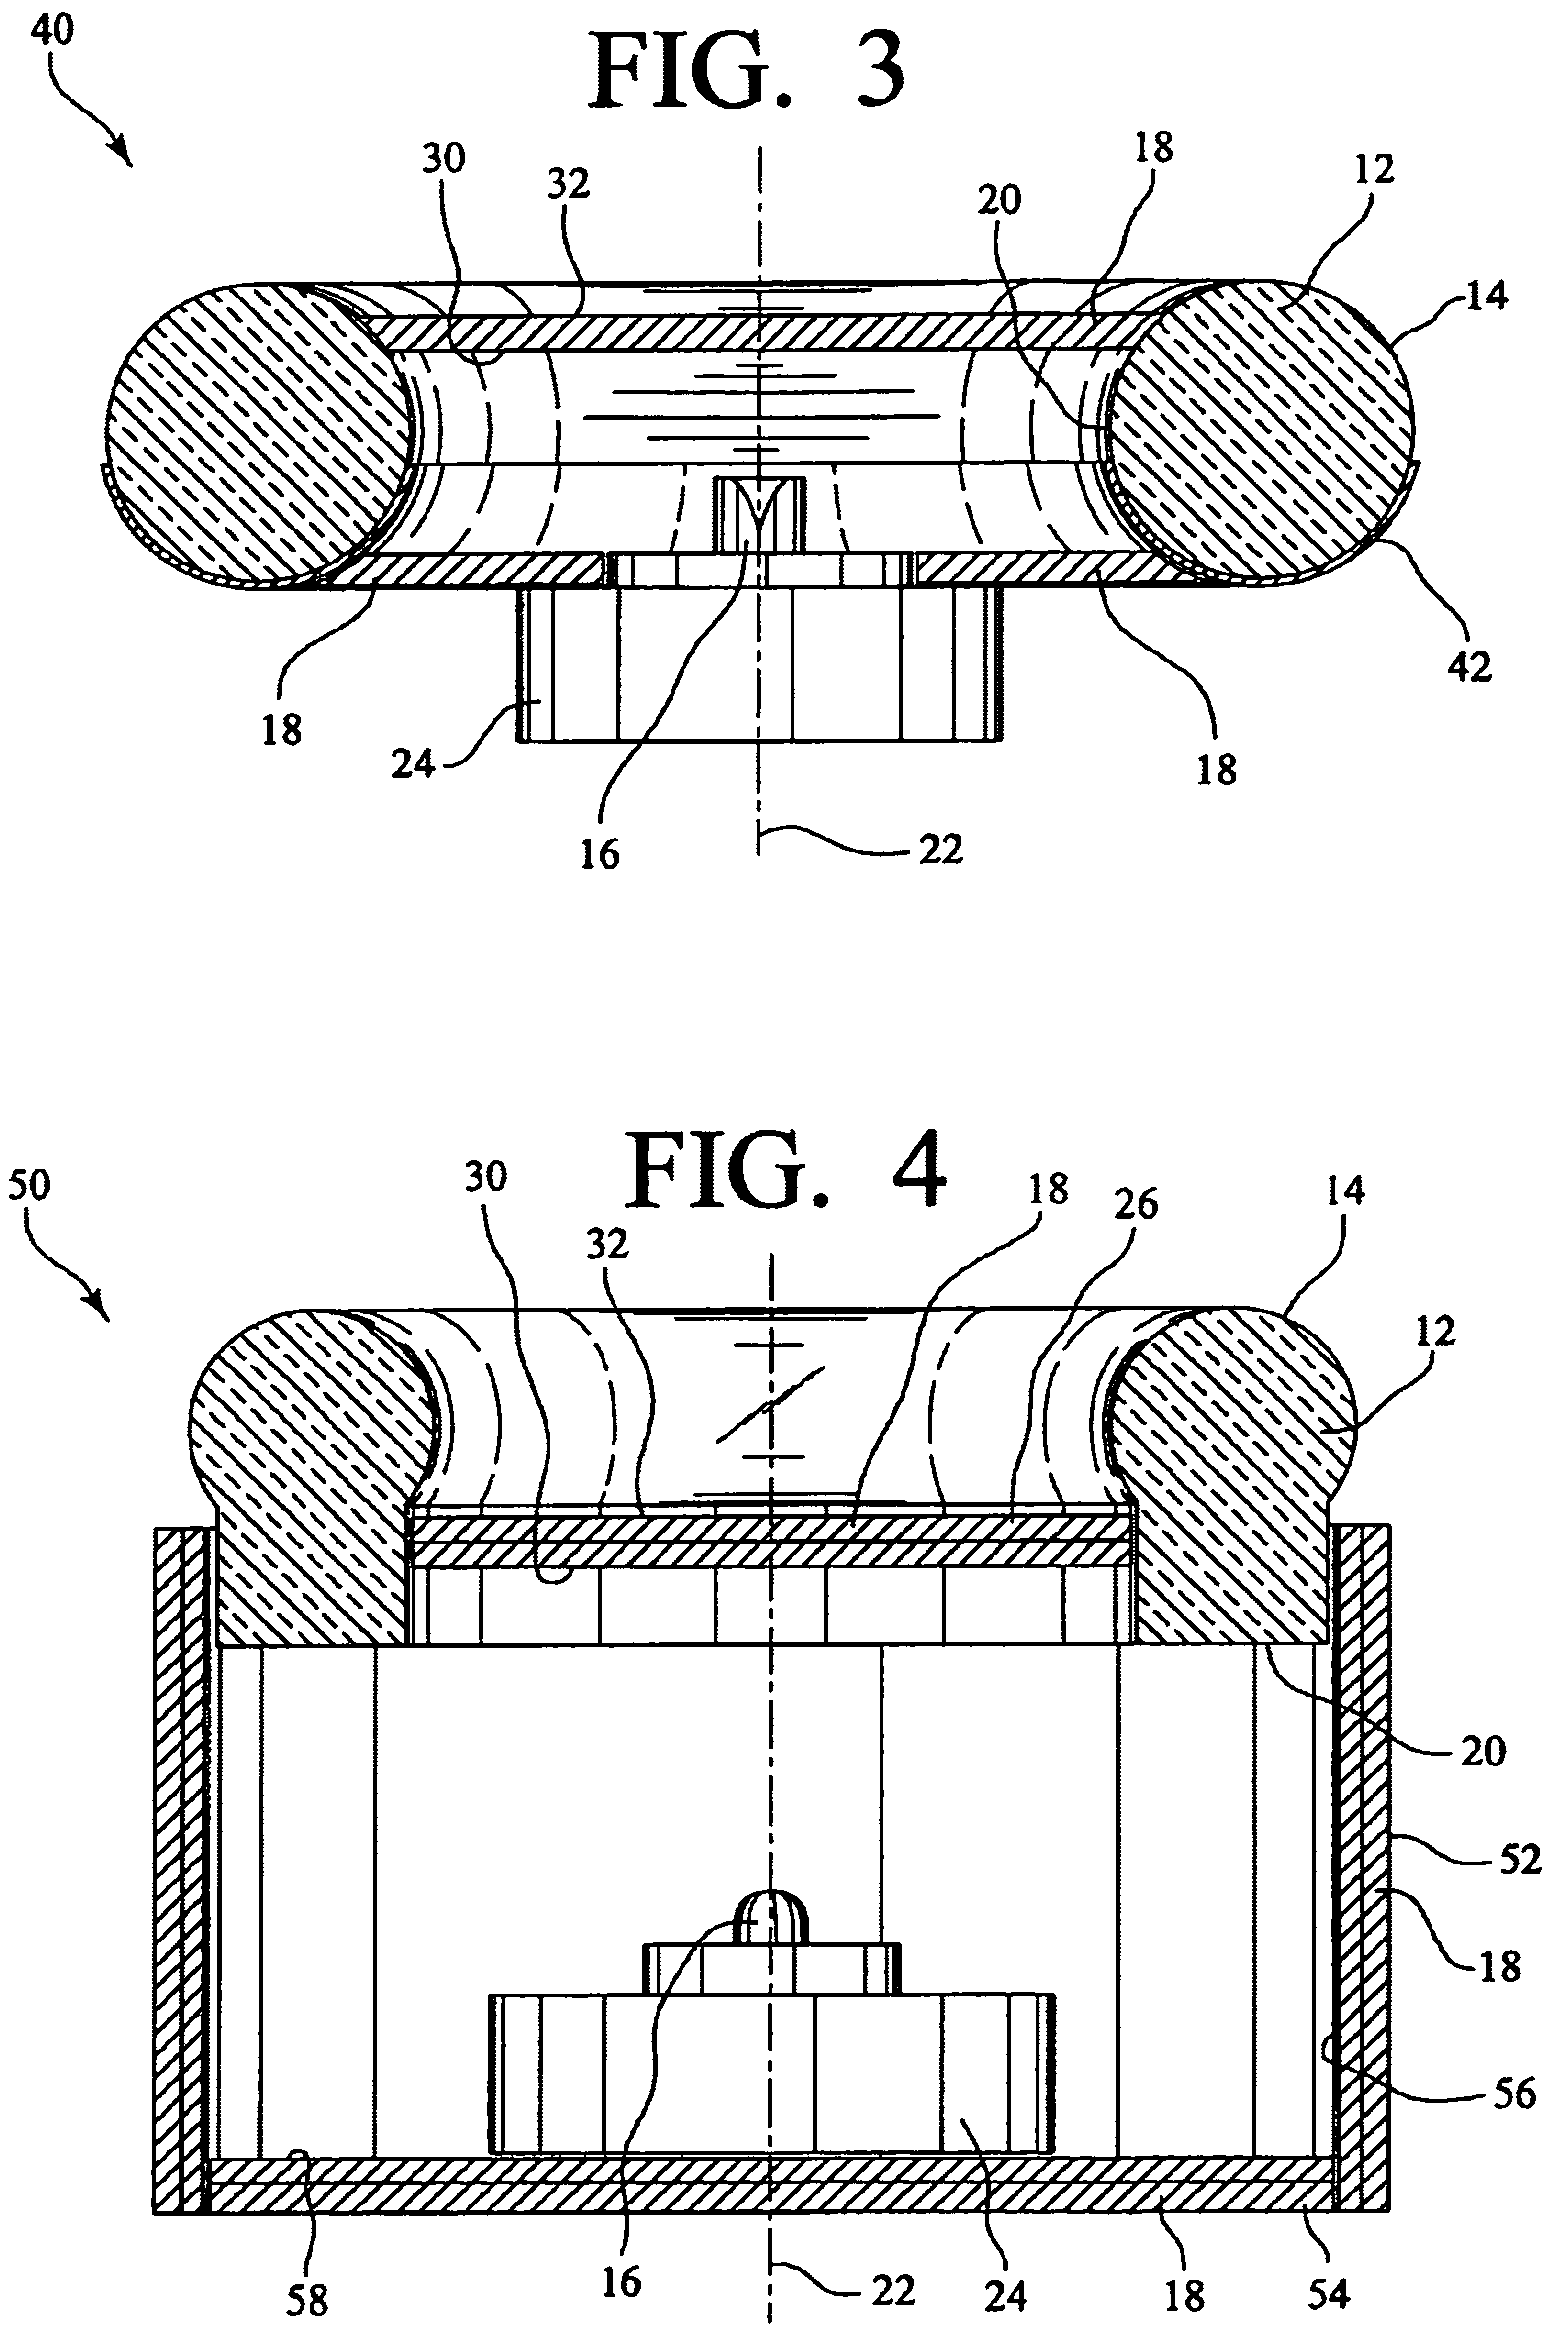 Illumination device for simulating neon or similar lighting in the shape of a toroid